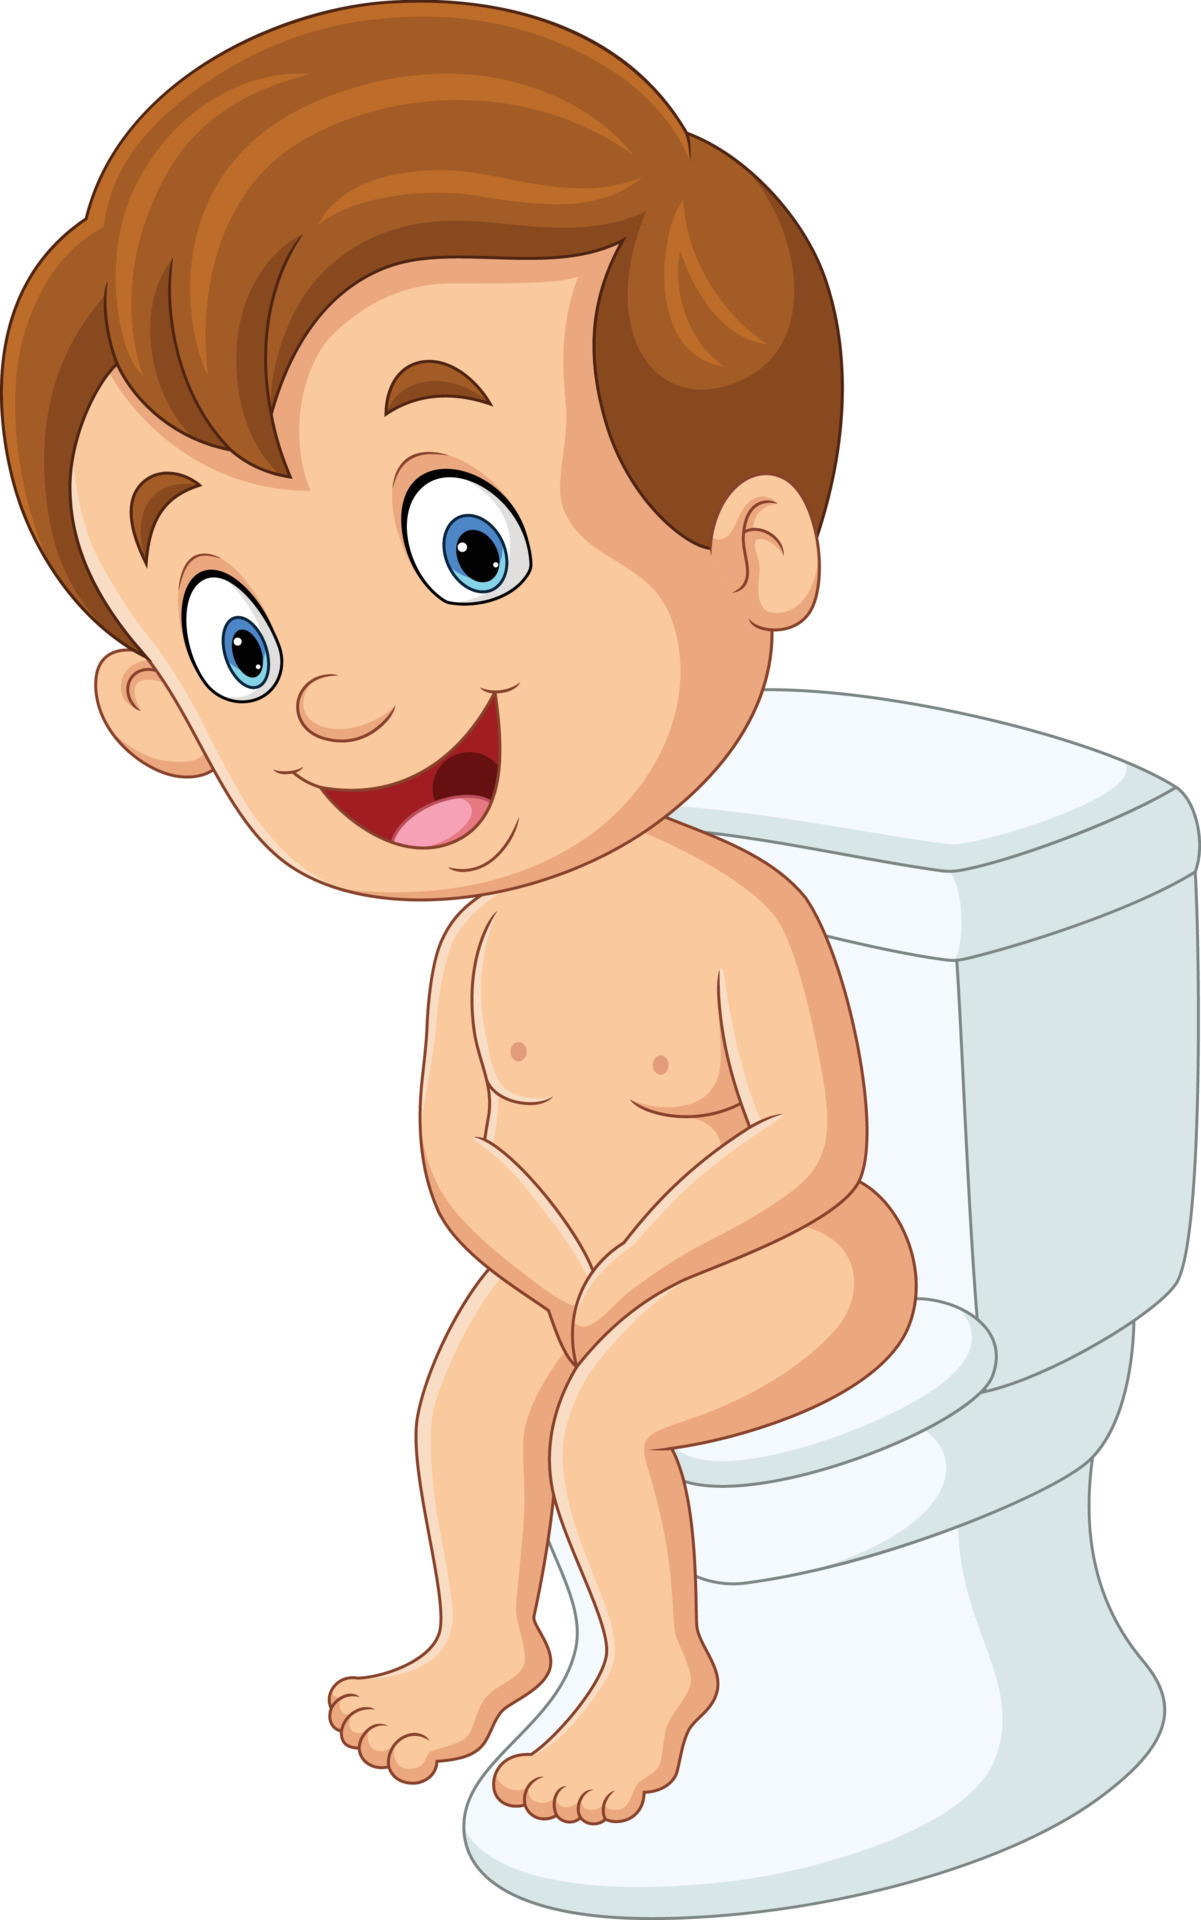 Boy Pee Vector Art, Icons, and Graphics for Free Download